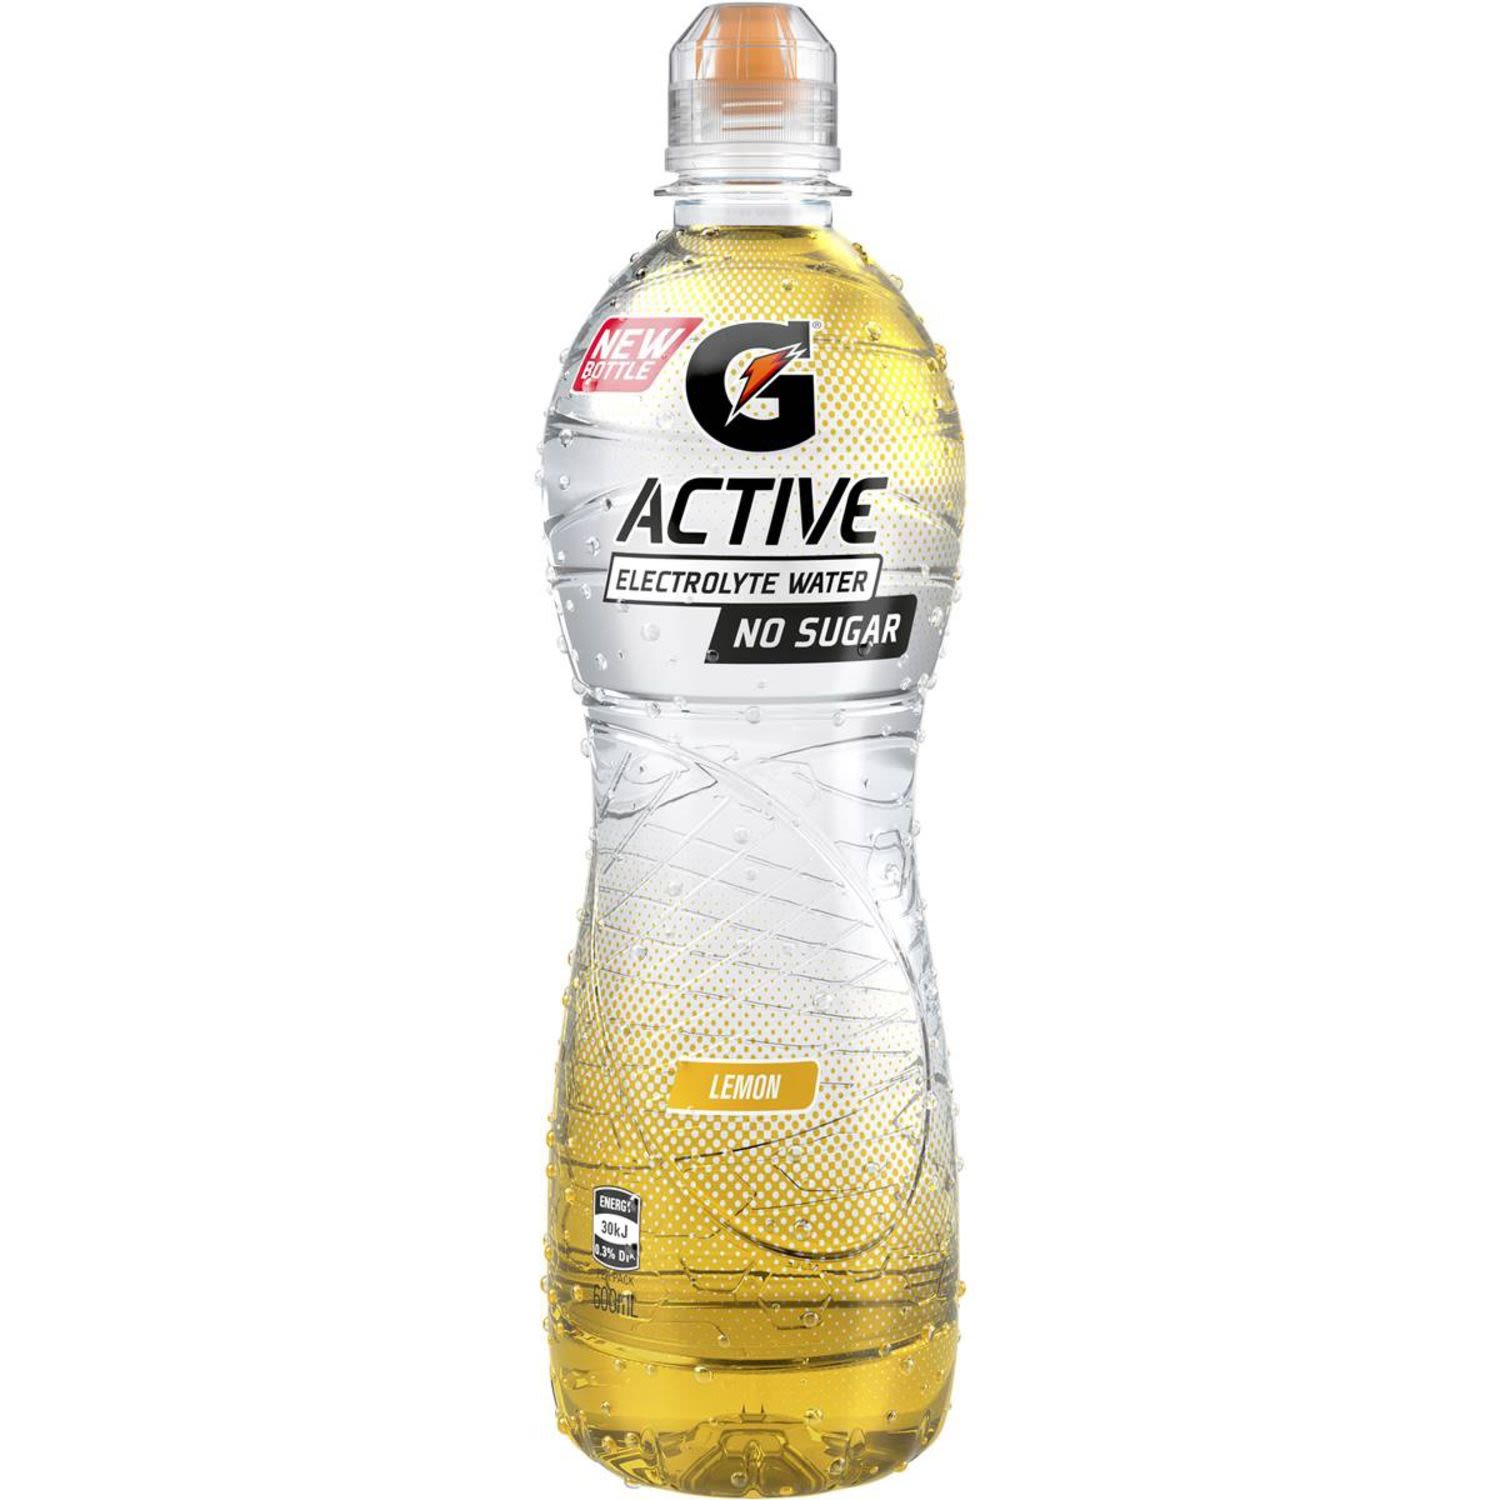 G Active electrolyte water contains the critical electrolytes to help replace what’s lost in sweat and fuel you to perform at your best, all with zero carbs and minimal calories to compliment your nutritional efforts.

You lose a whole lot more than water when you sweat. Losses in fluids and electrolytes can negatively impact performance. During training and exercise, you burn off vital energy needed to continue competing with the best.

Gatorade is the Number 1 sports rehydration drink on the planet scientifically formulated to help refuel to support the demands you put on your body, which is why it's trusted by some of the world's best athletes. G Active Lemon electrolyte water is no different.

Available in a convenient 600mL sports drink bottle to help replenish and hydrate your body on-the-go.

NOTHING BEATS GATORADE.<br /> <br />